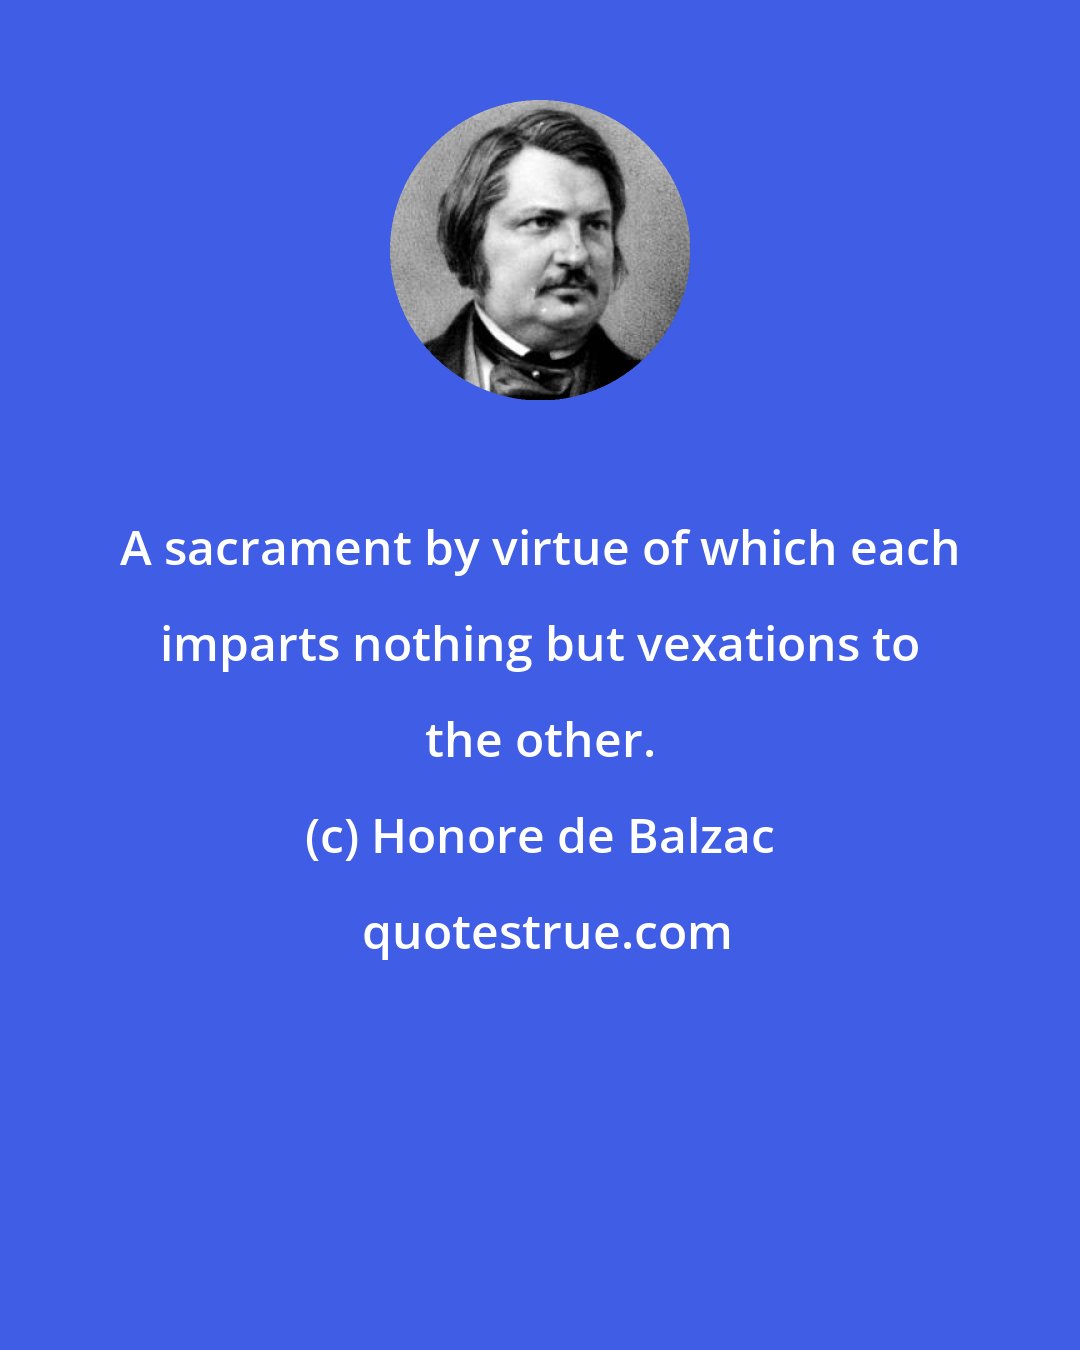 Honore de Balzac: A sacrament by virtue of which each imparts nothing but vexations to the other.